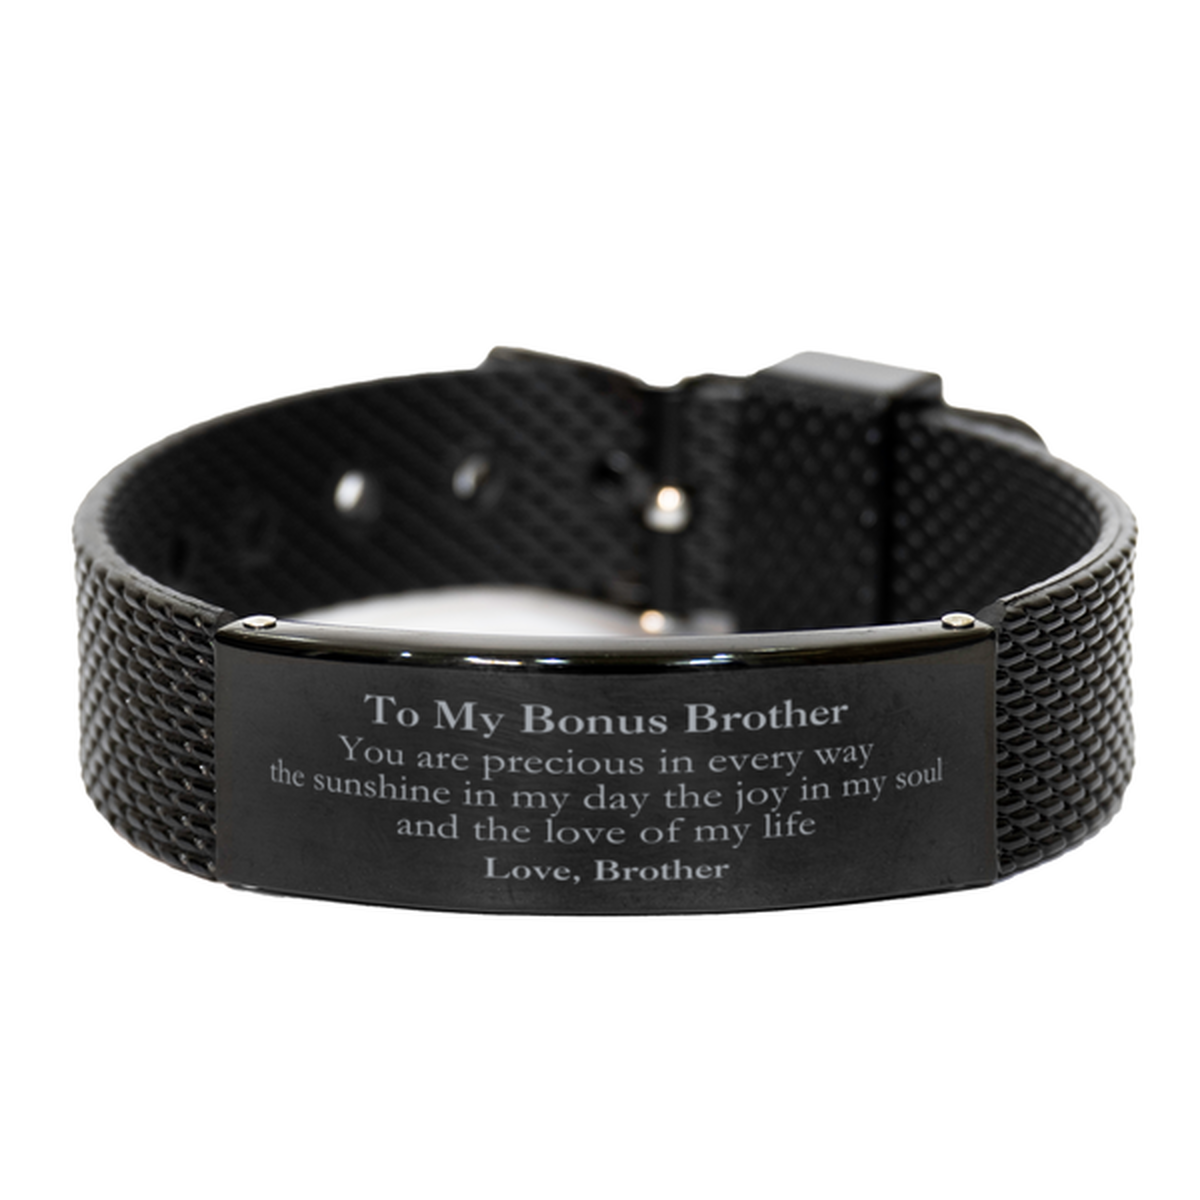 Graduation Gifts for Bonus Brother Black Shark Mesh Bracelet Present from Brother, Christmas Bonus Brother Birthday Gifts Bonus Brother You are precious in every way the sunshine in my day. Love, Brother